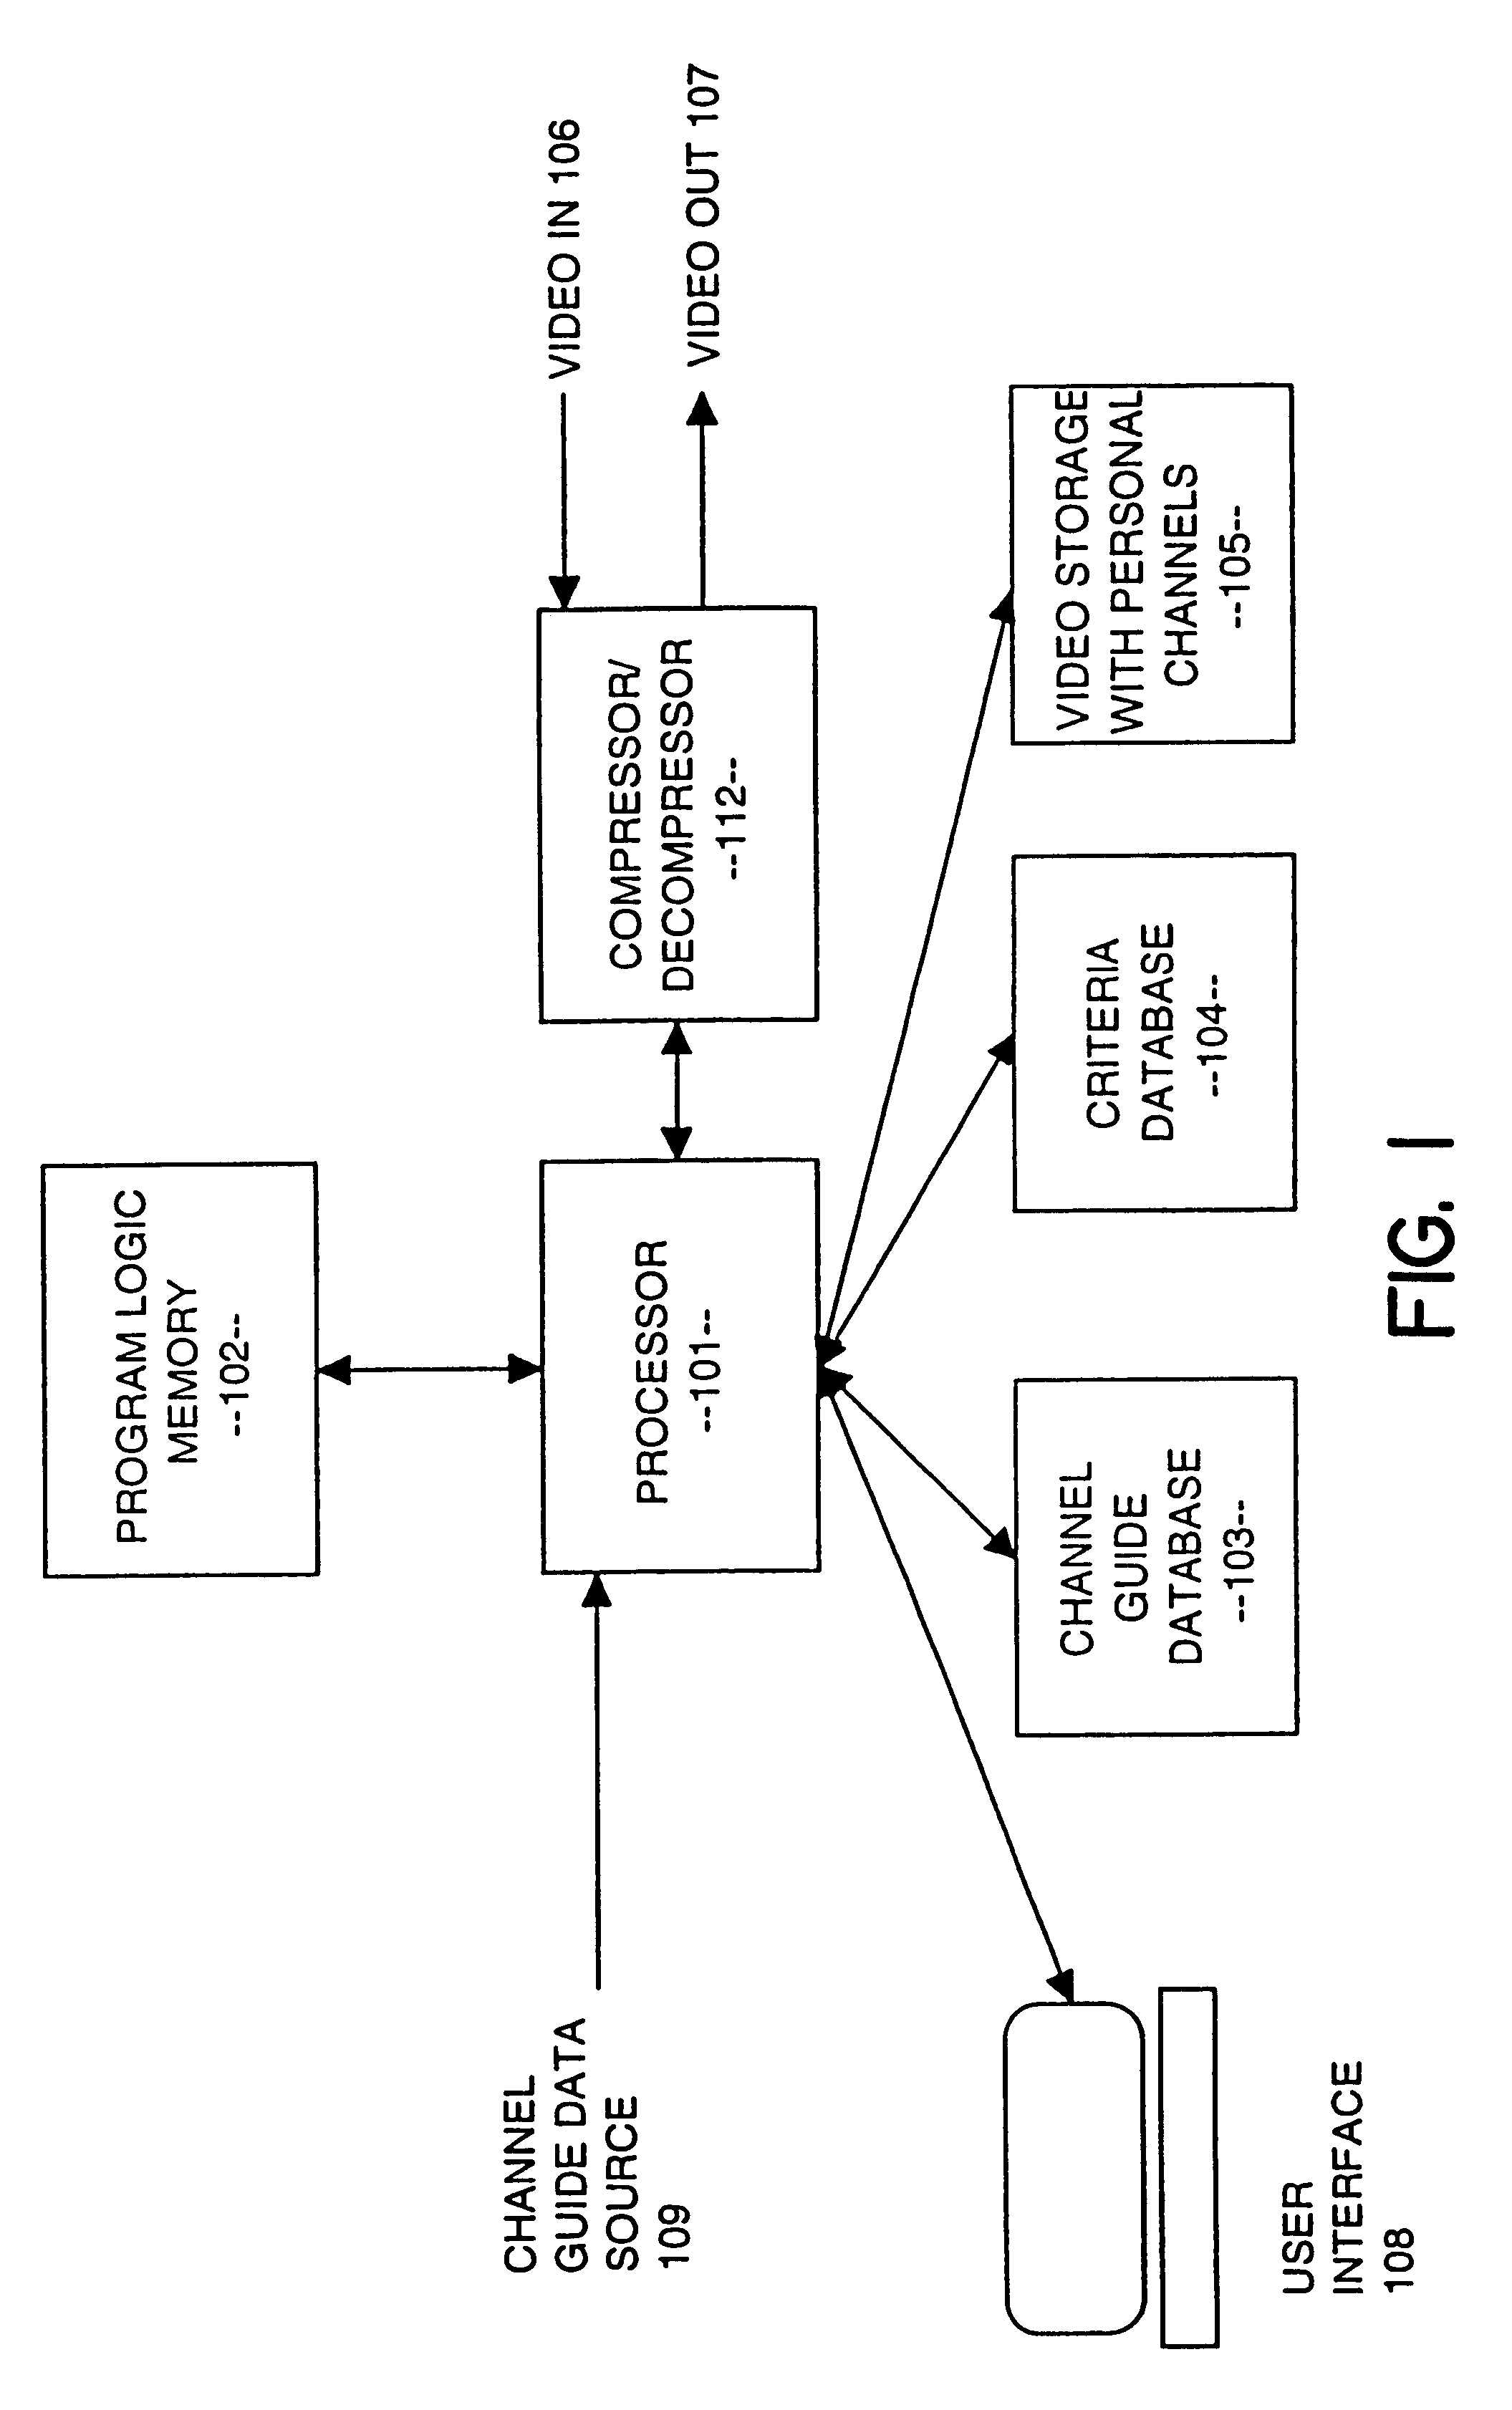 Video data recorder with integrated channel guides